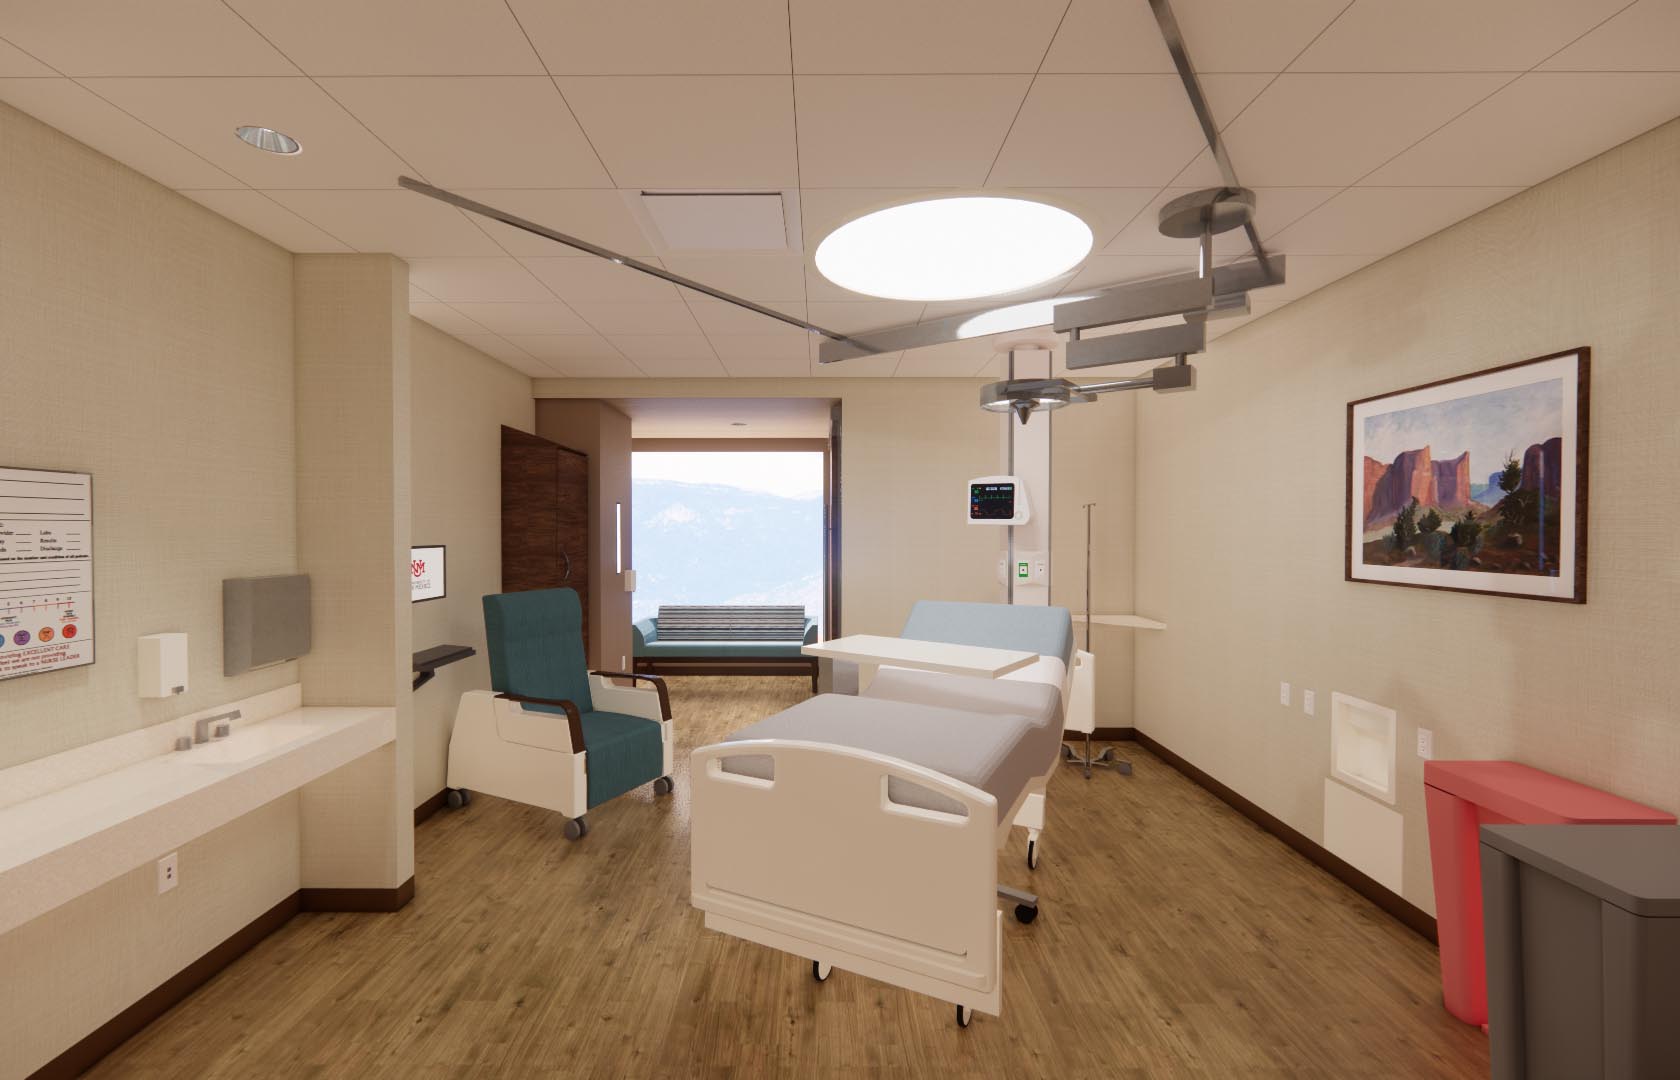 Concept art of a patient room in the new tower expansion